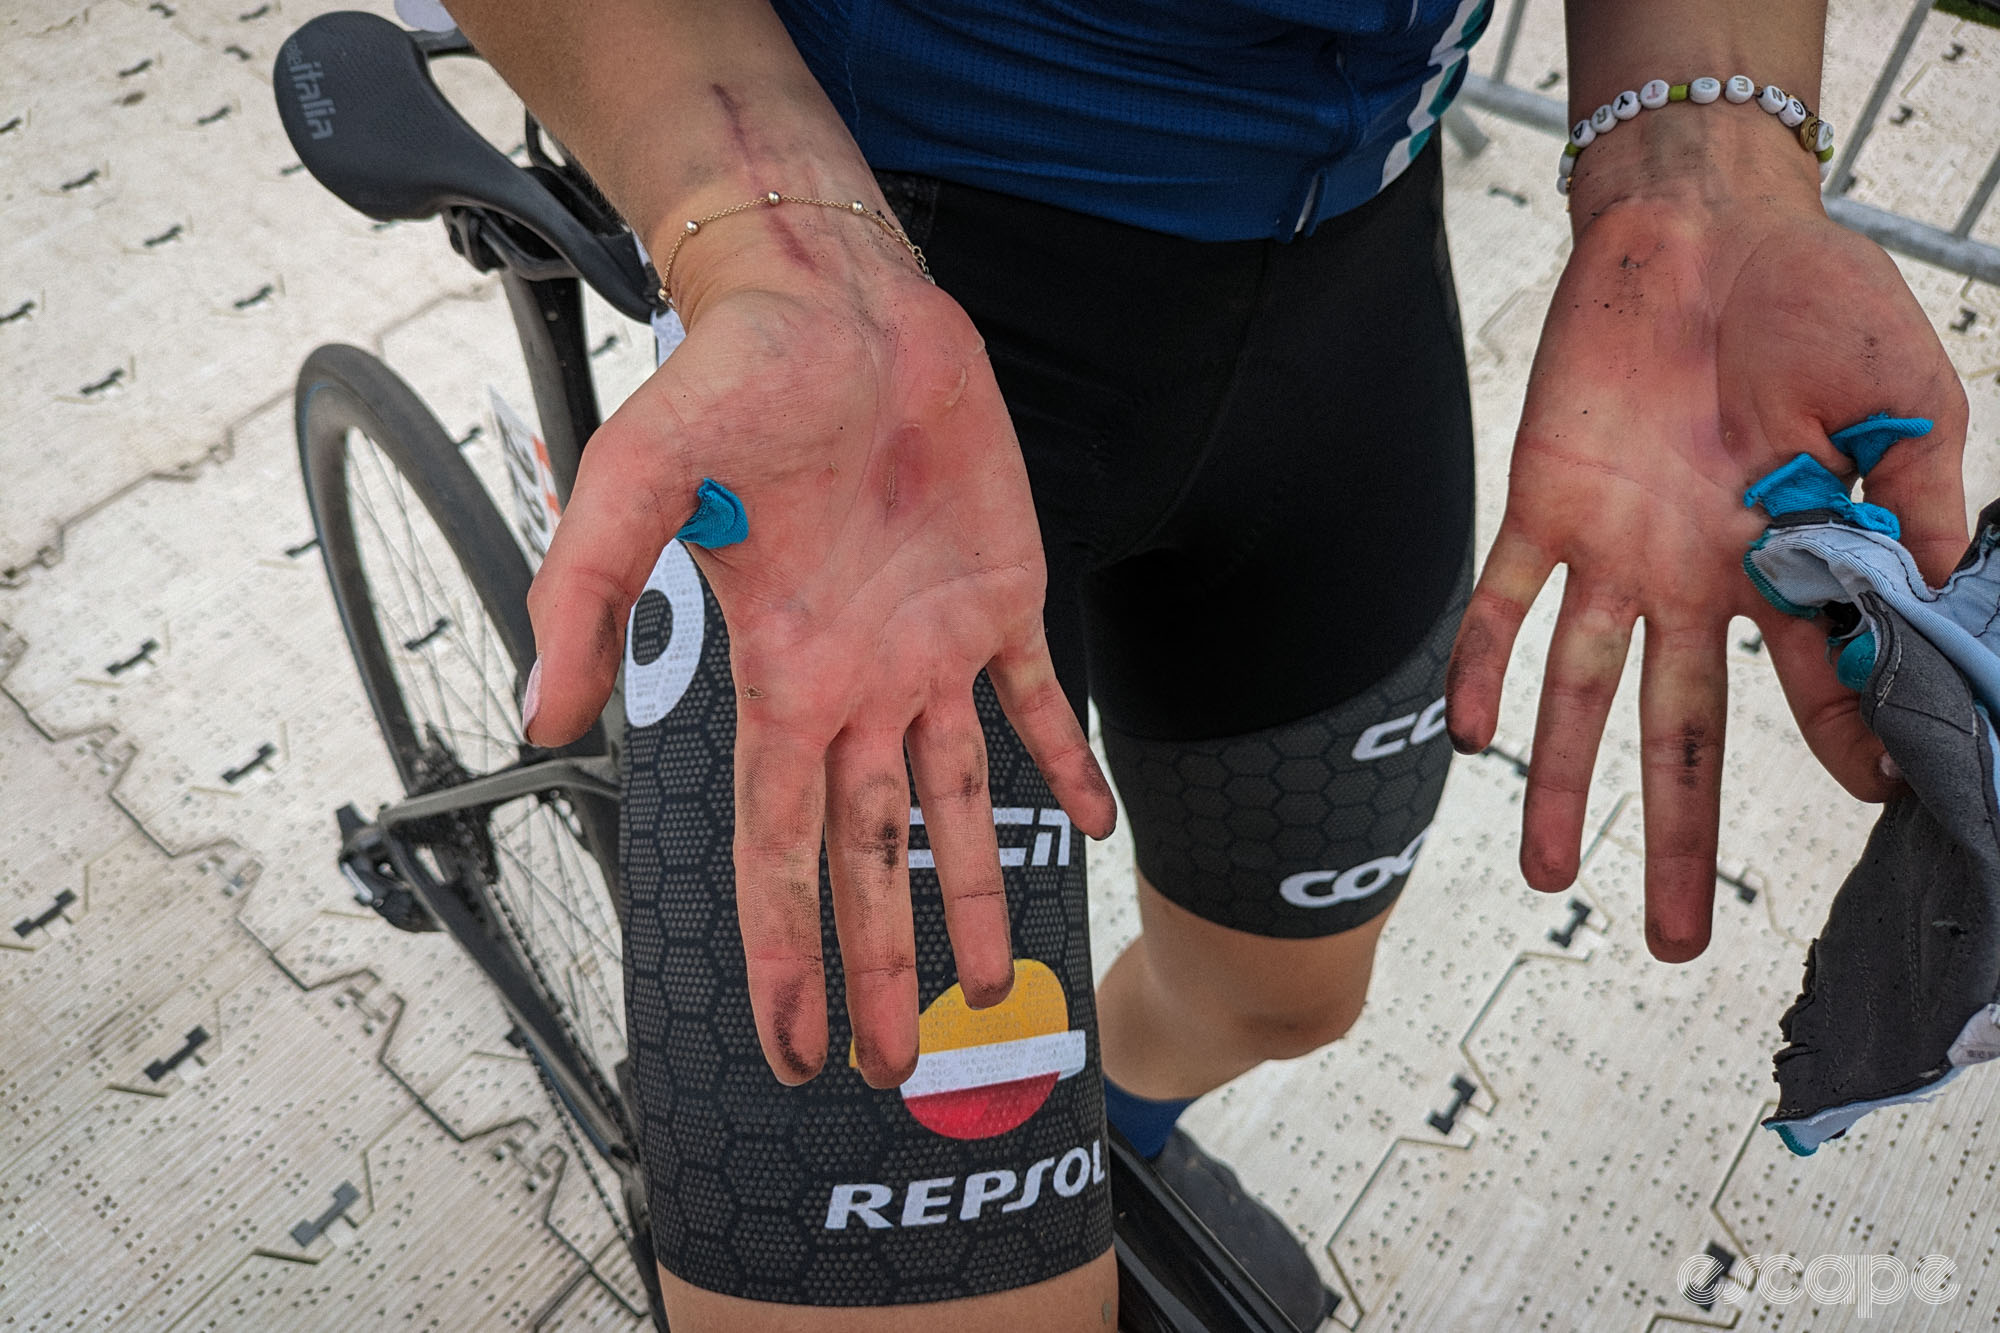 Stina Kavegi's hands are in particularly rough shape: dirty, tape between thumb and forefinger peeling, and several large blisters.